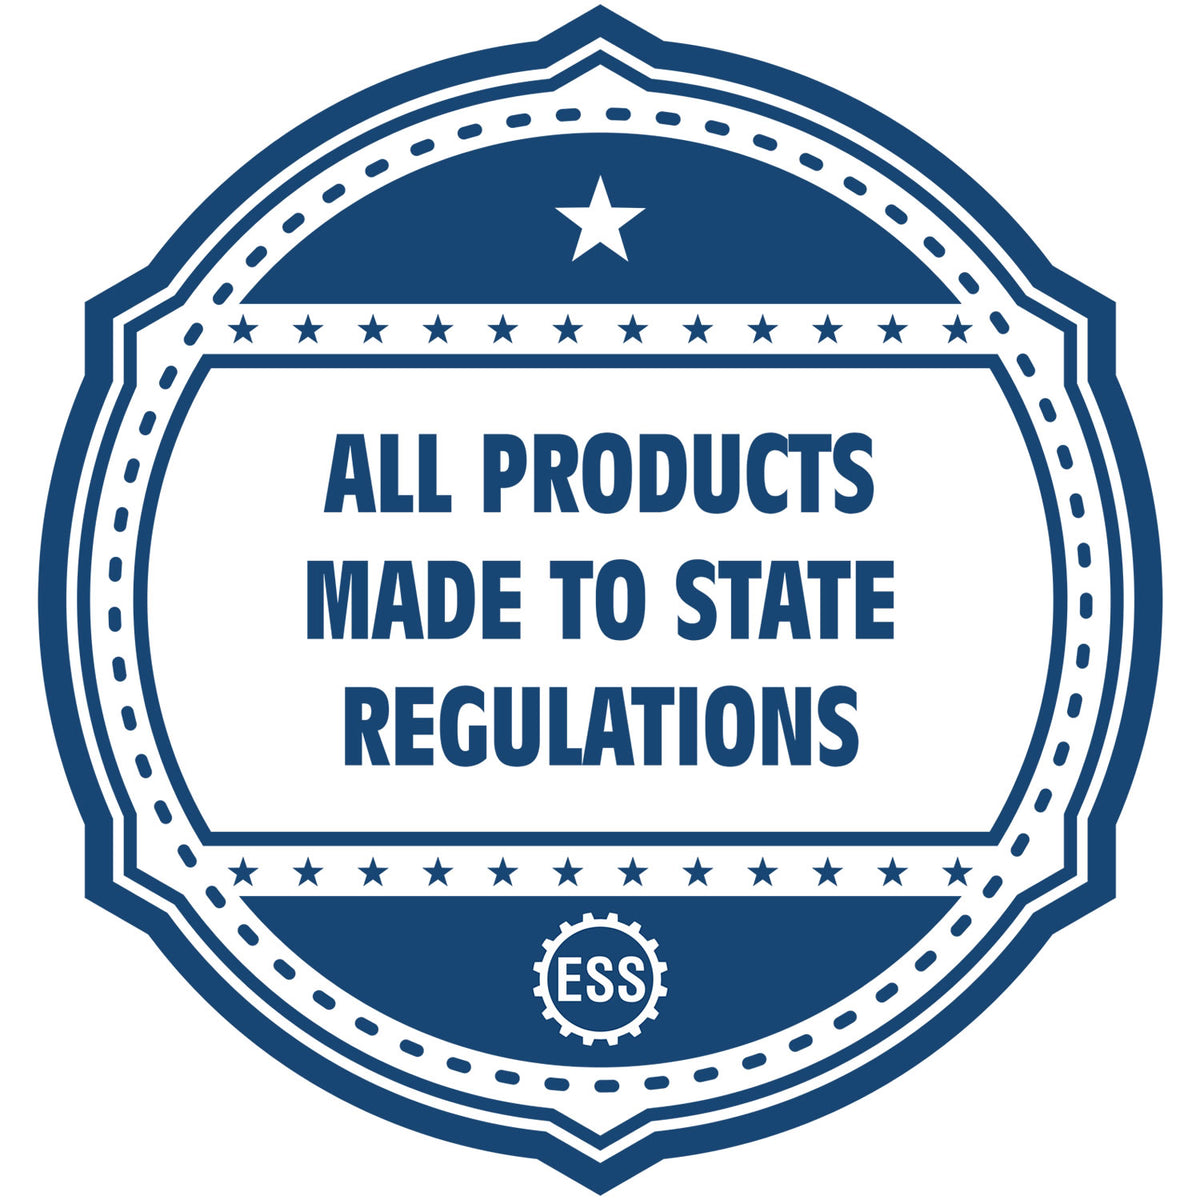 An icon or badge element for the Self-Inking Maine Landscape Architect Stamp showing that this product is made in compliance with state regulations.